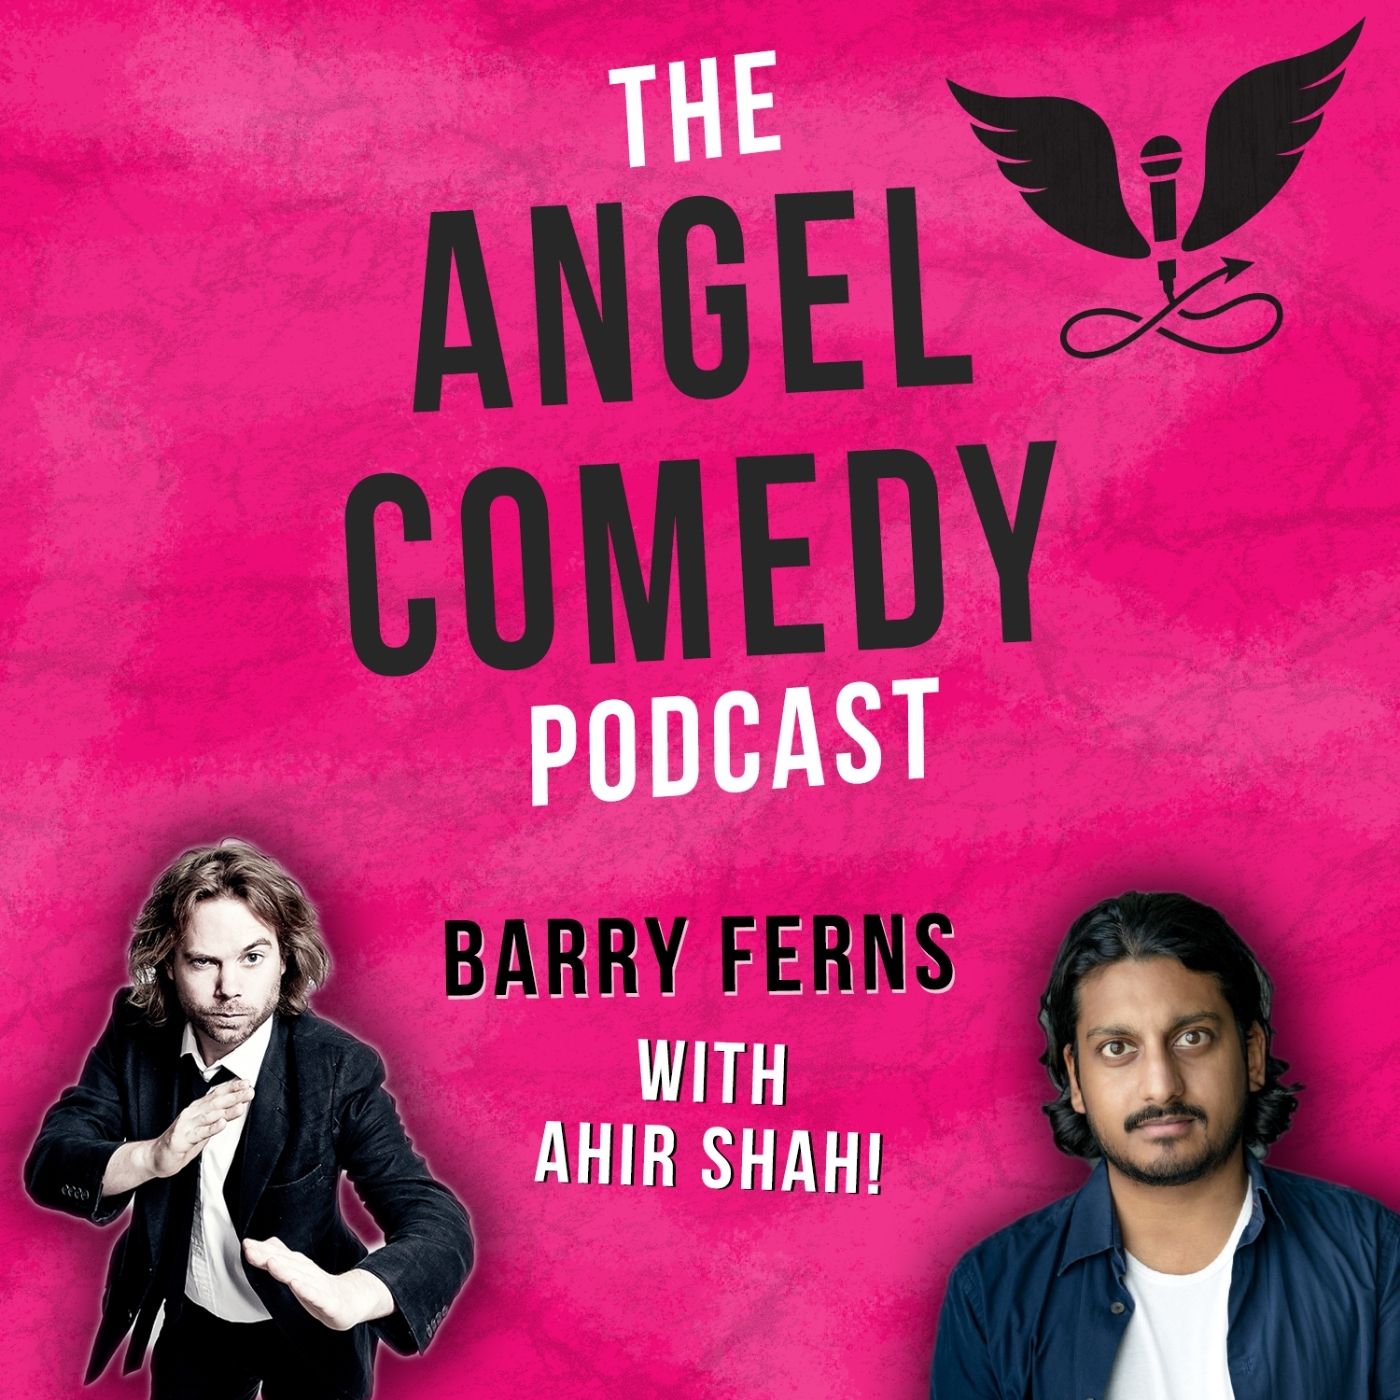 The Angel Comedy Podcast with Ahir Shah